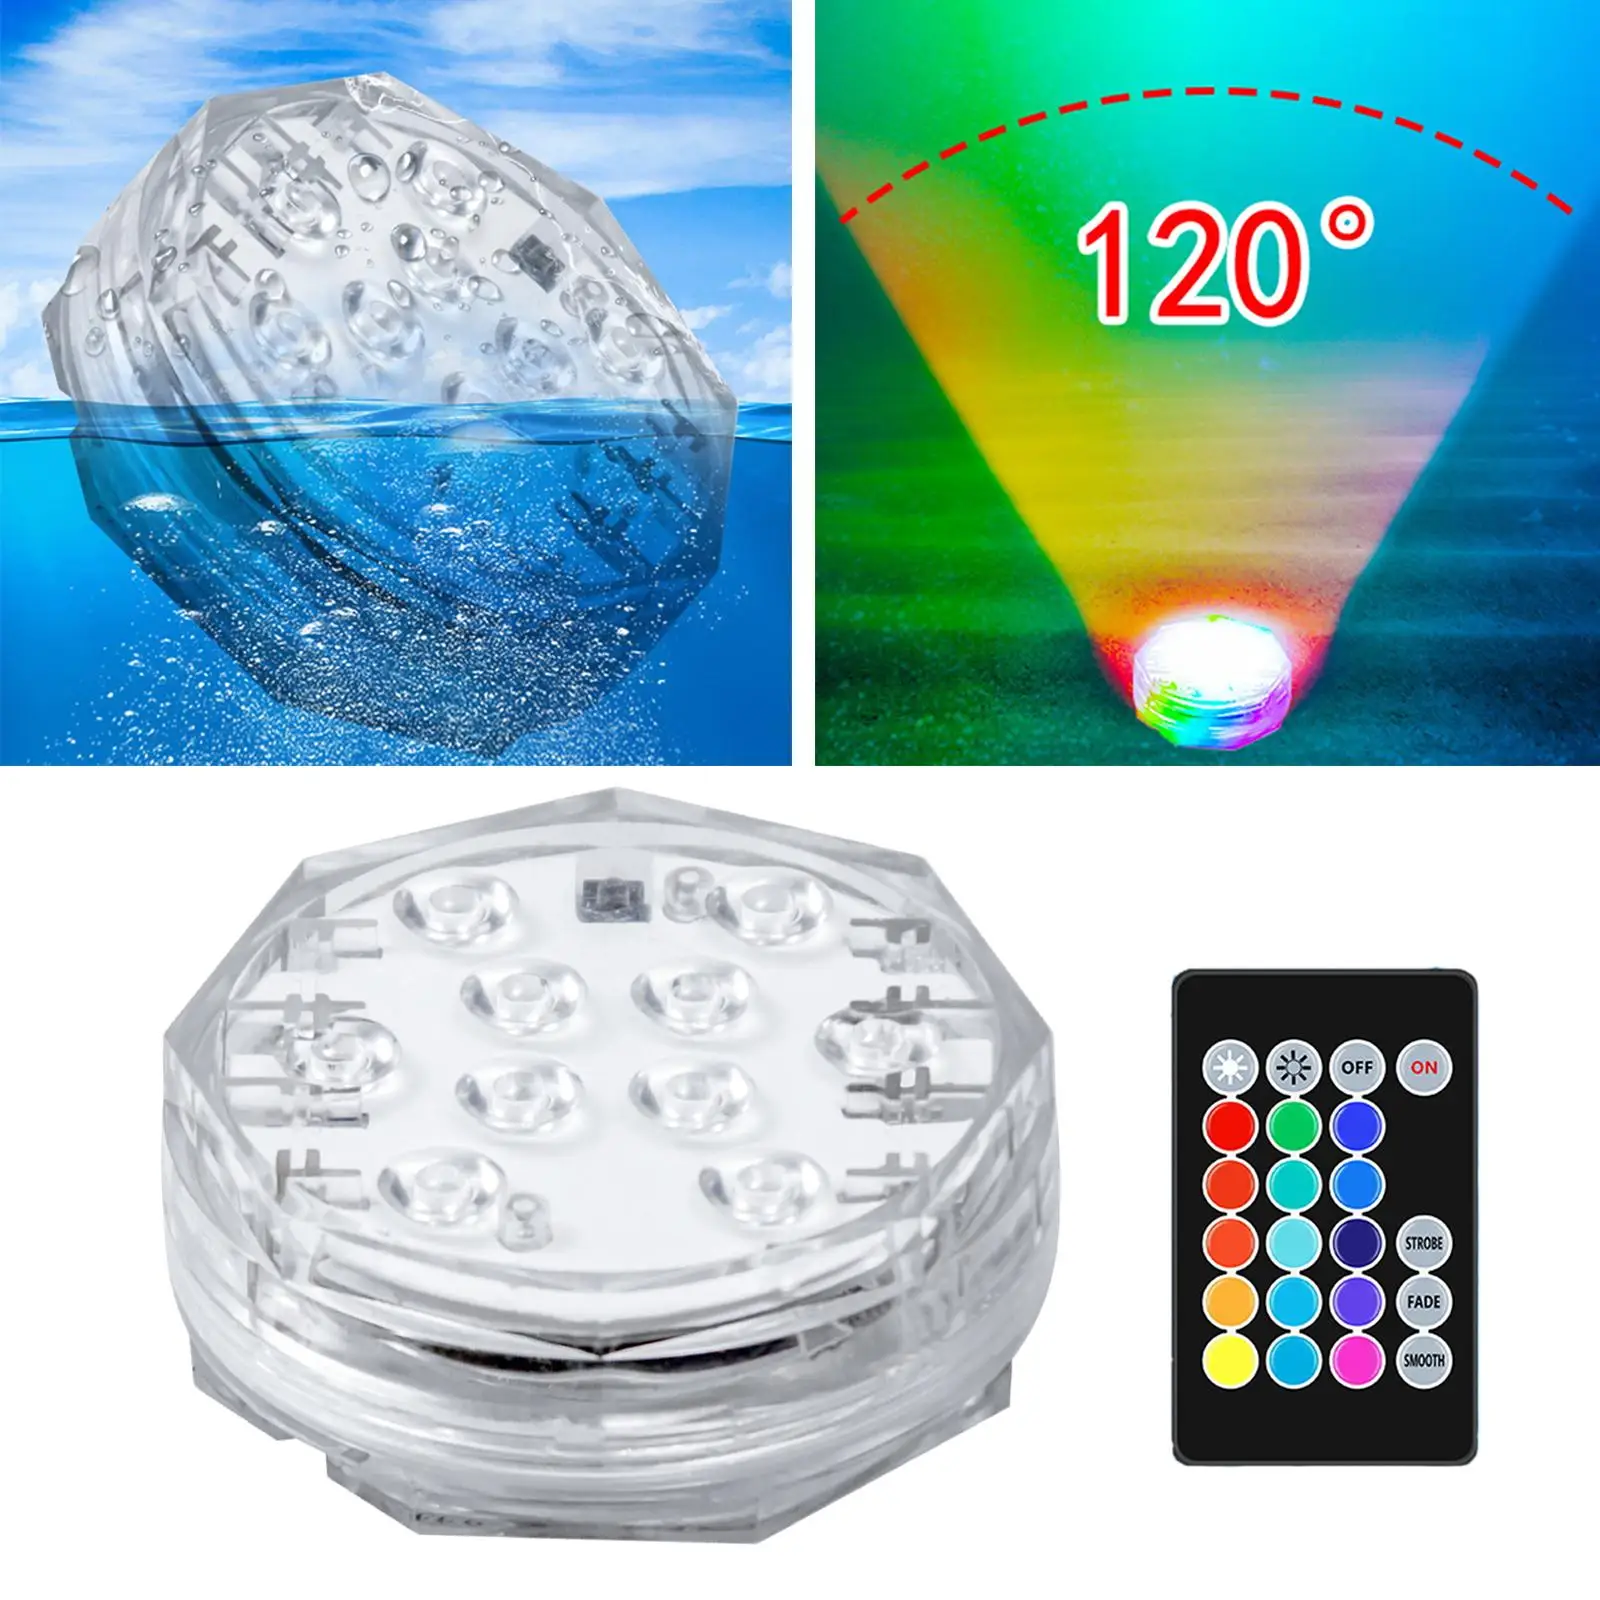 Waterproof Submersible LED Light 15 Colors Underwater Lamp Pool Light for Christmas Wedding Party Summer Beach Decoration